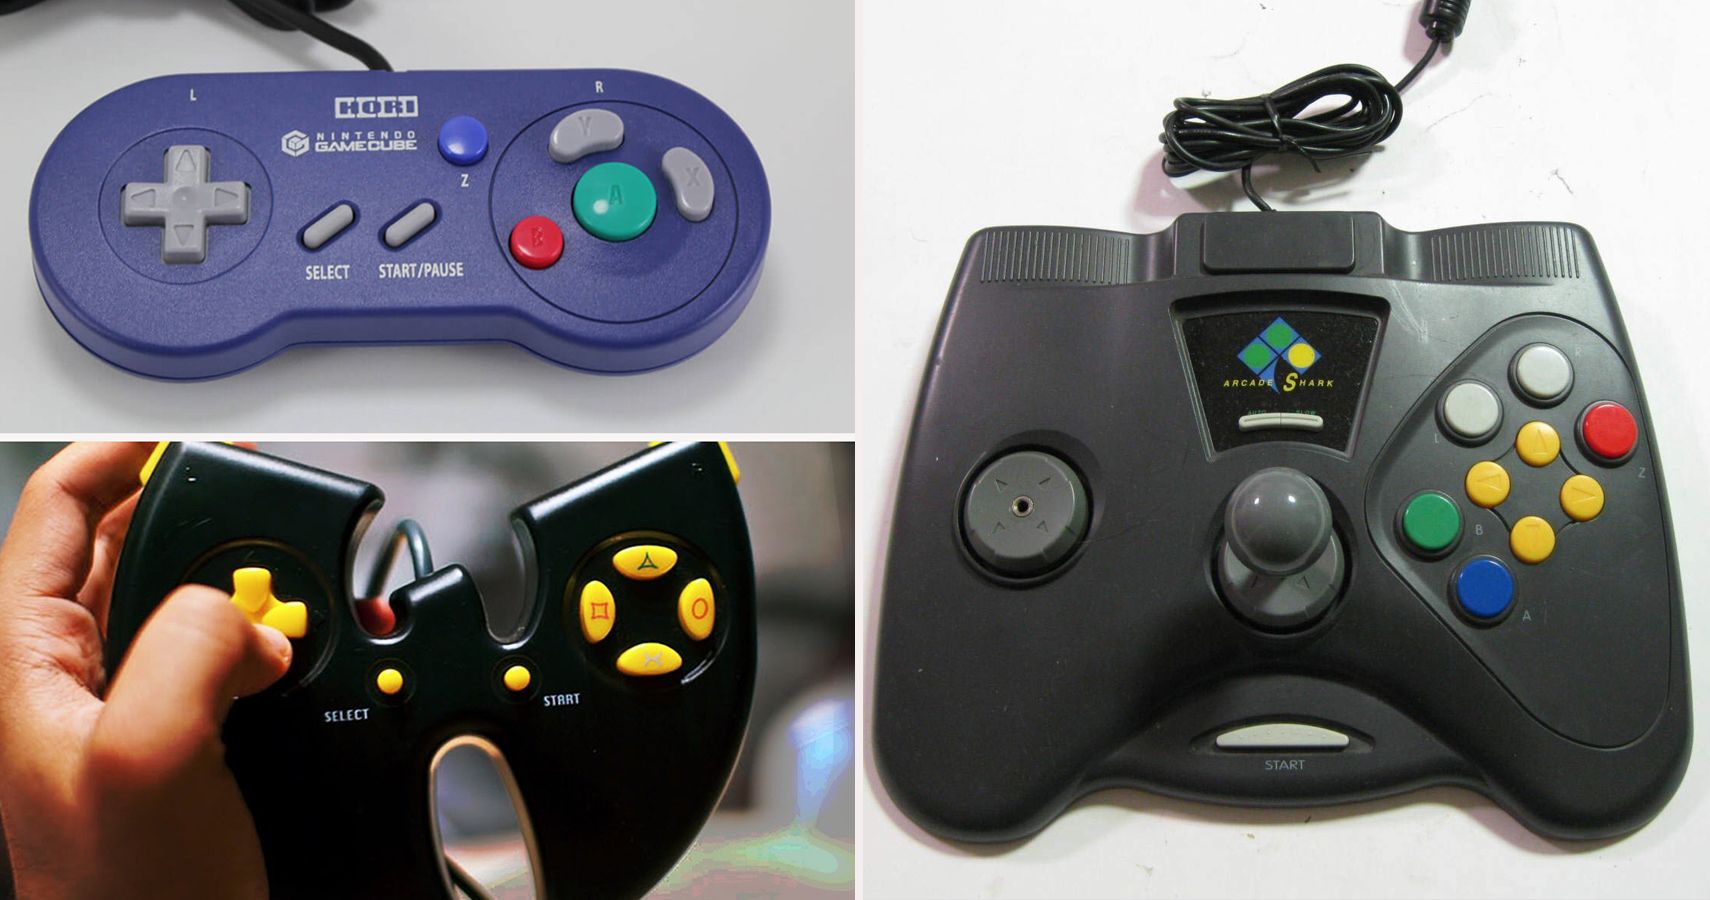 Download The 20 Worst Knockoff Video Game Controllers (And 10 That ...